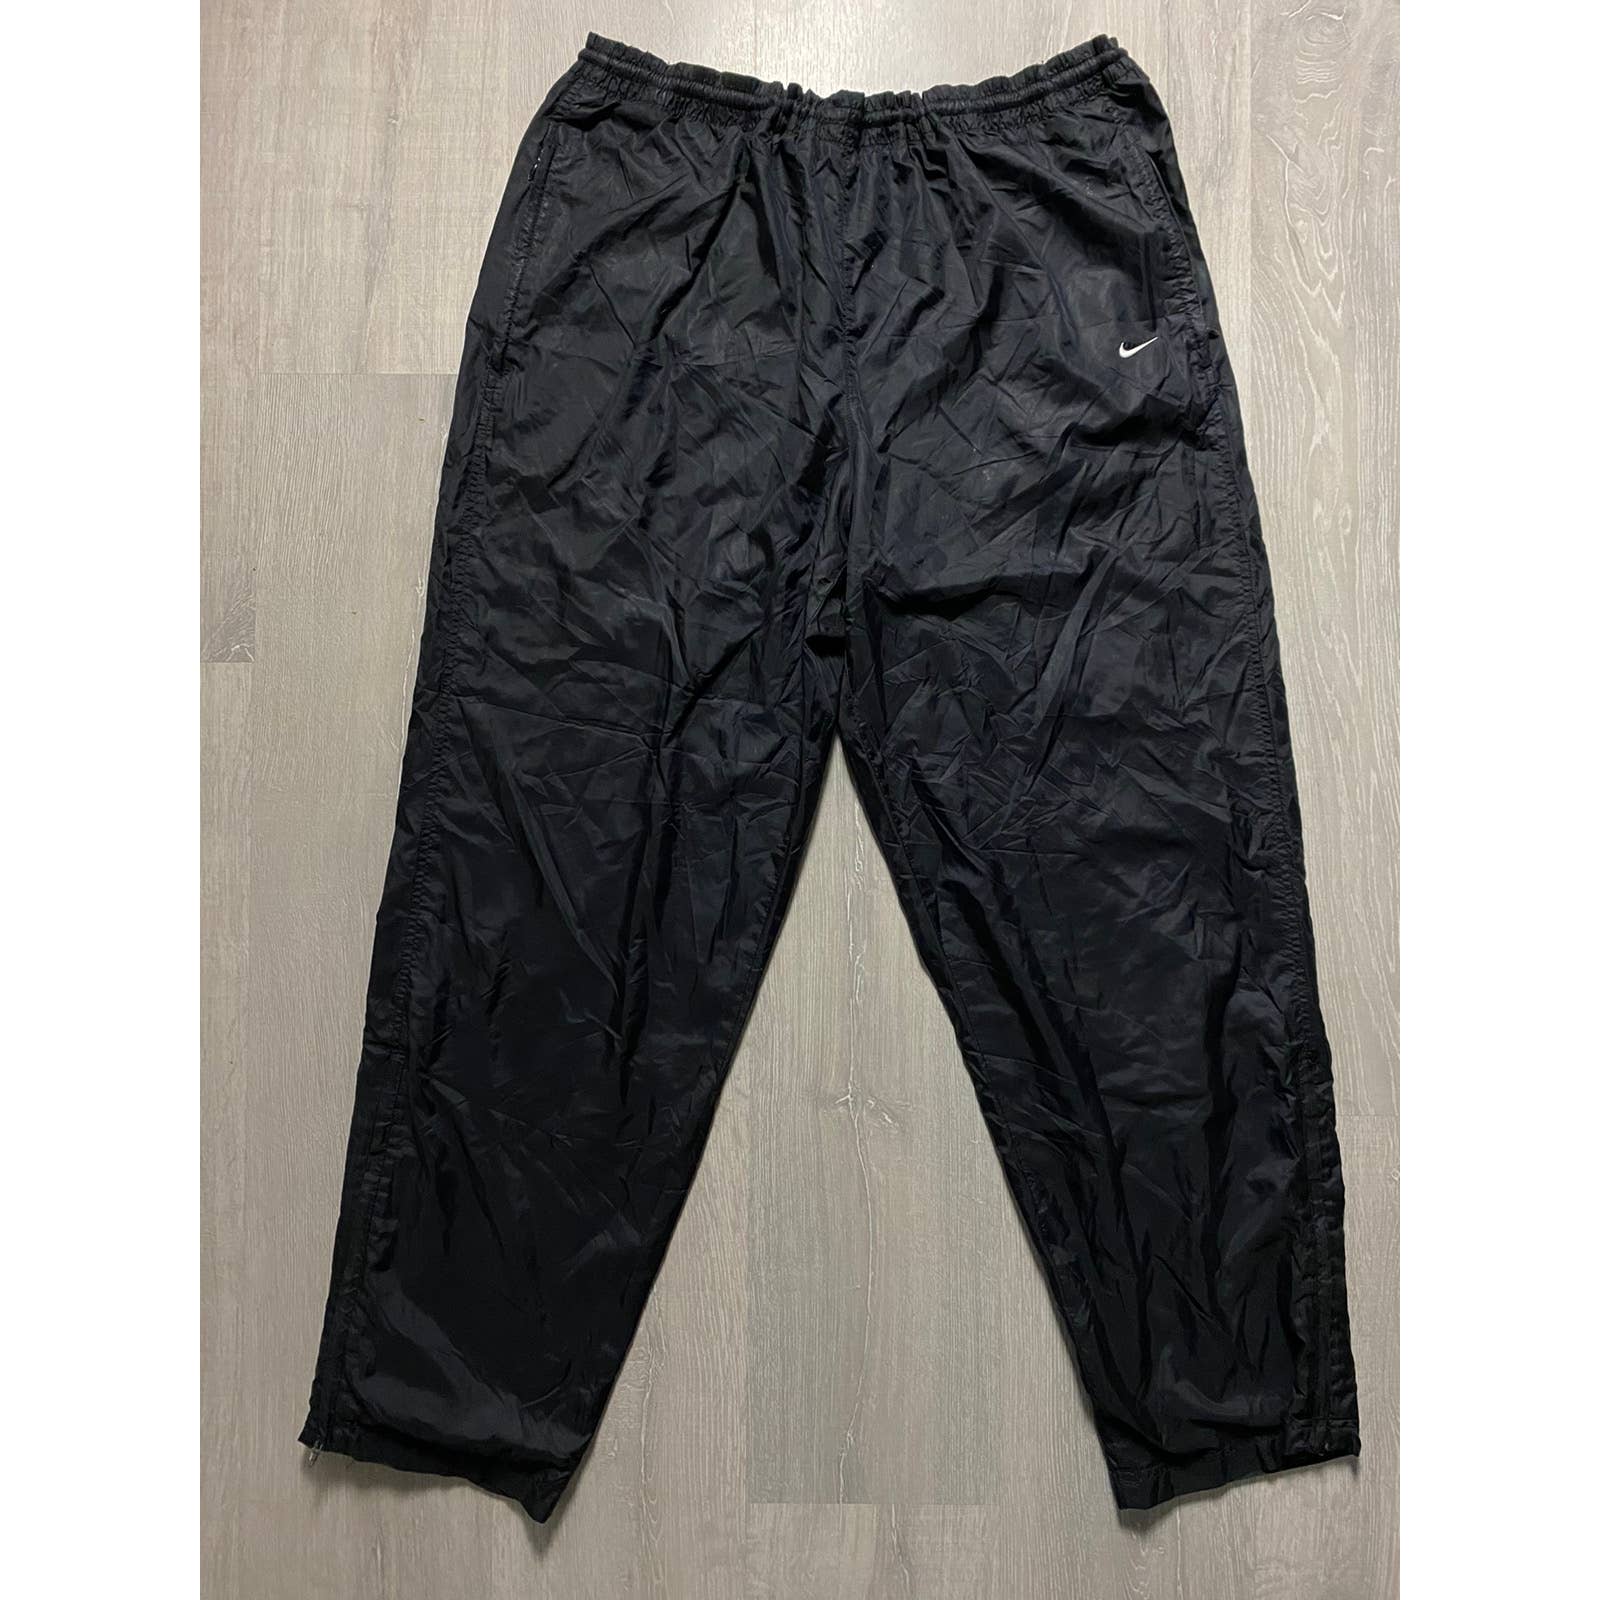 Nike vintage black track pants small swoosh 2000s parachute – Refitted